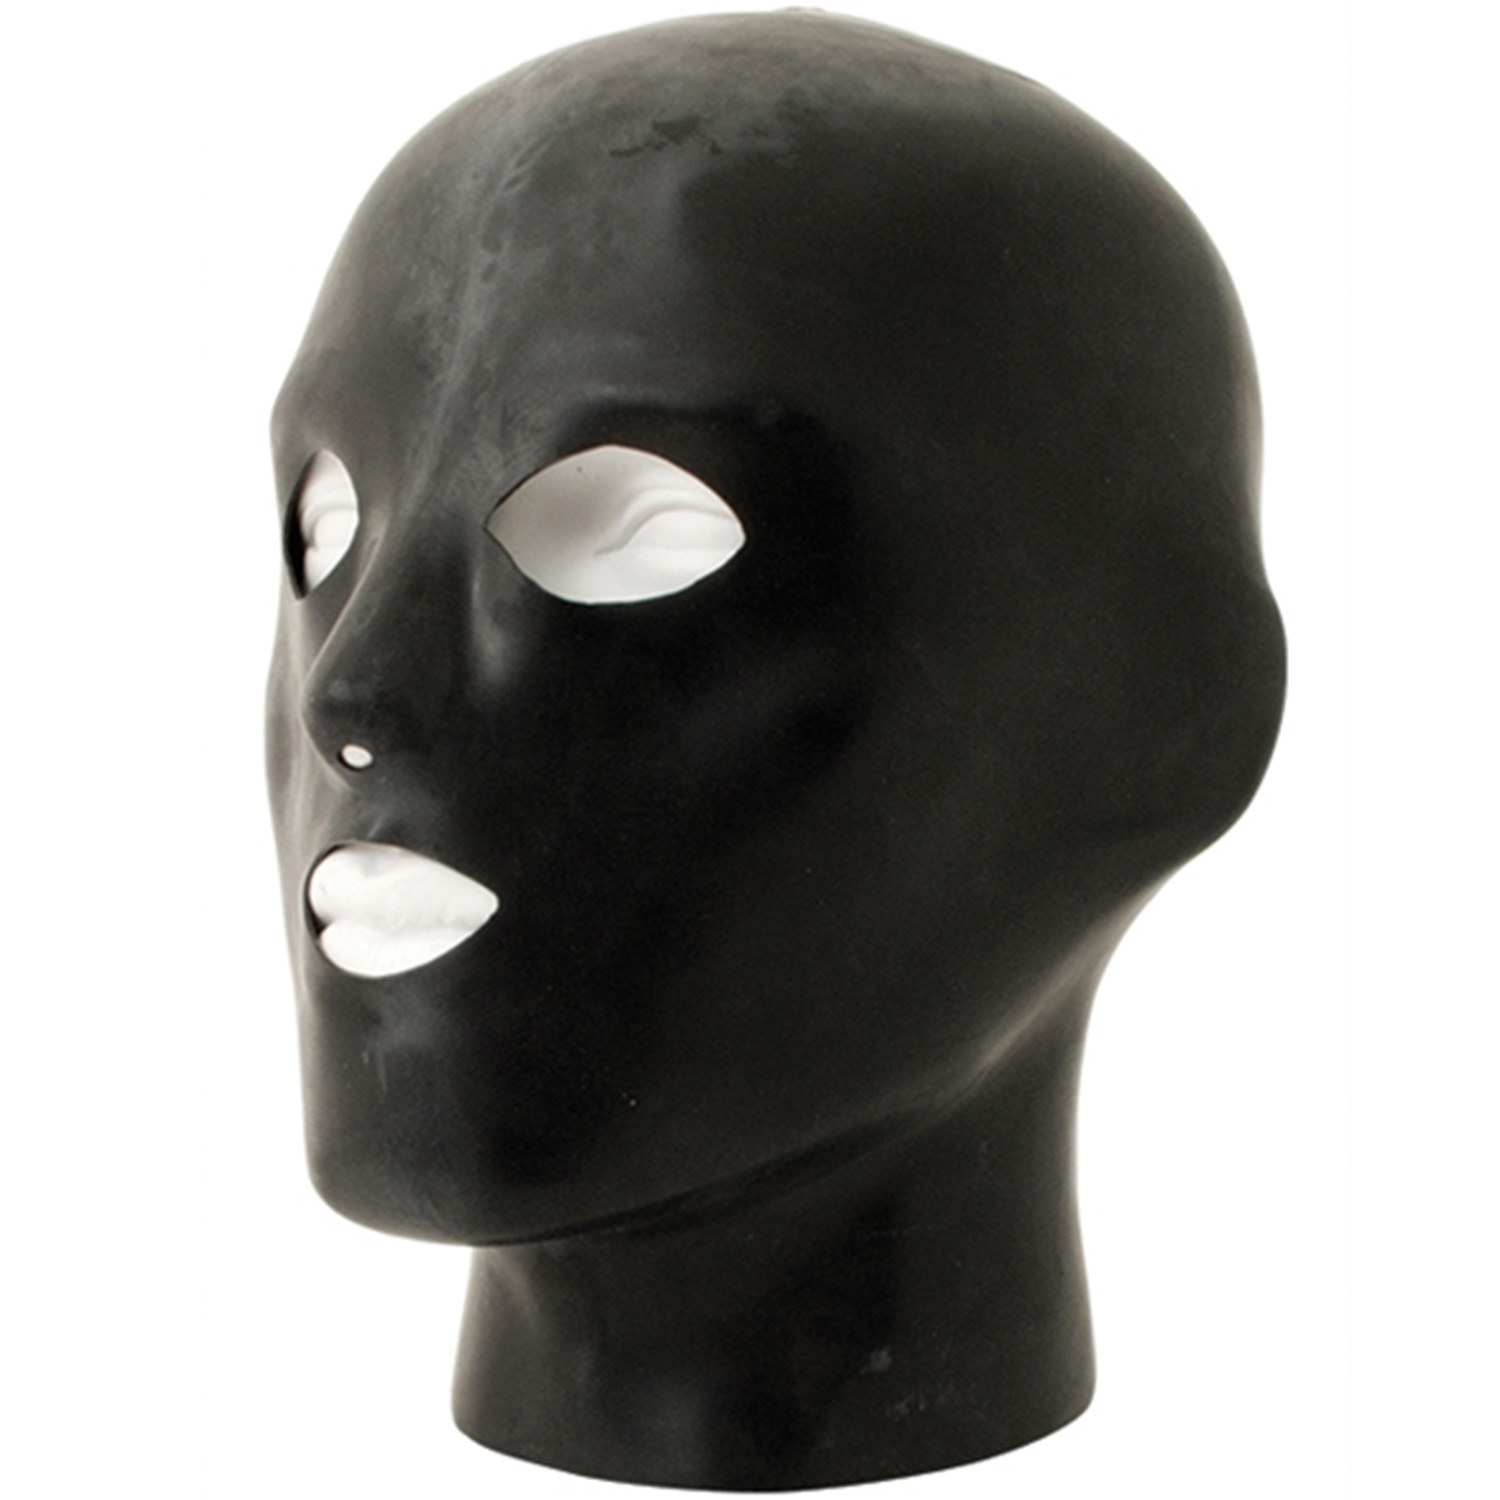 Mister B Rubber Heavy Duty Anatomical Hood With Holes - Black - L/XL thumbnail